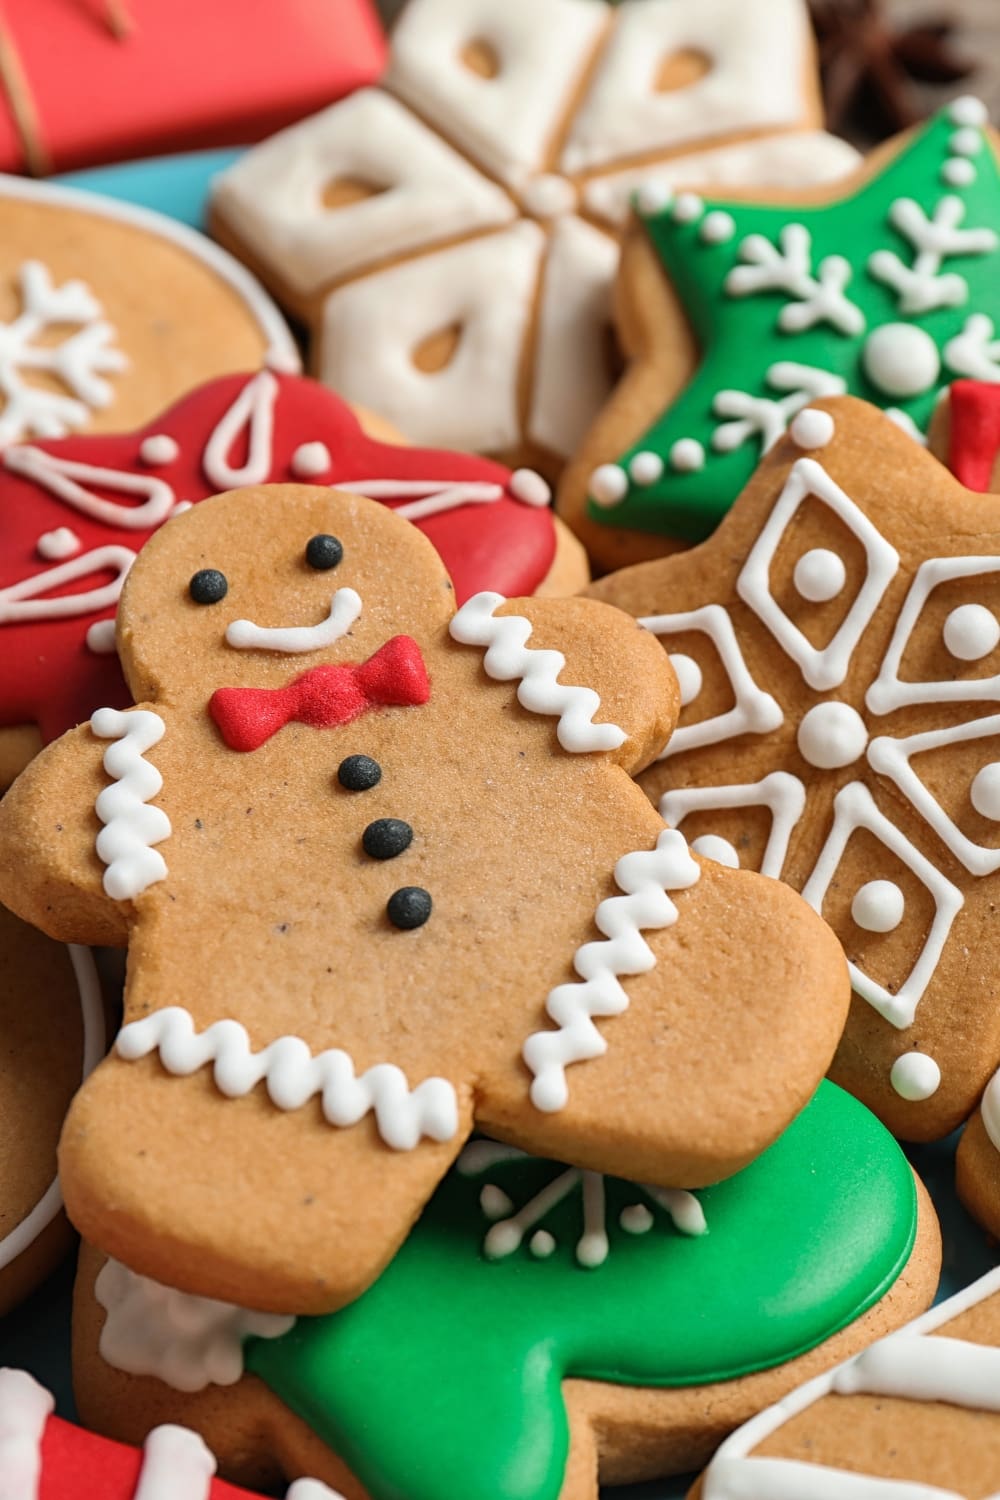 Twenty Cutters Every Cookie Decorator Should Own - The Sweet